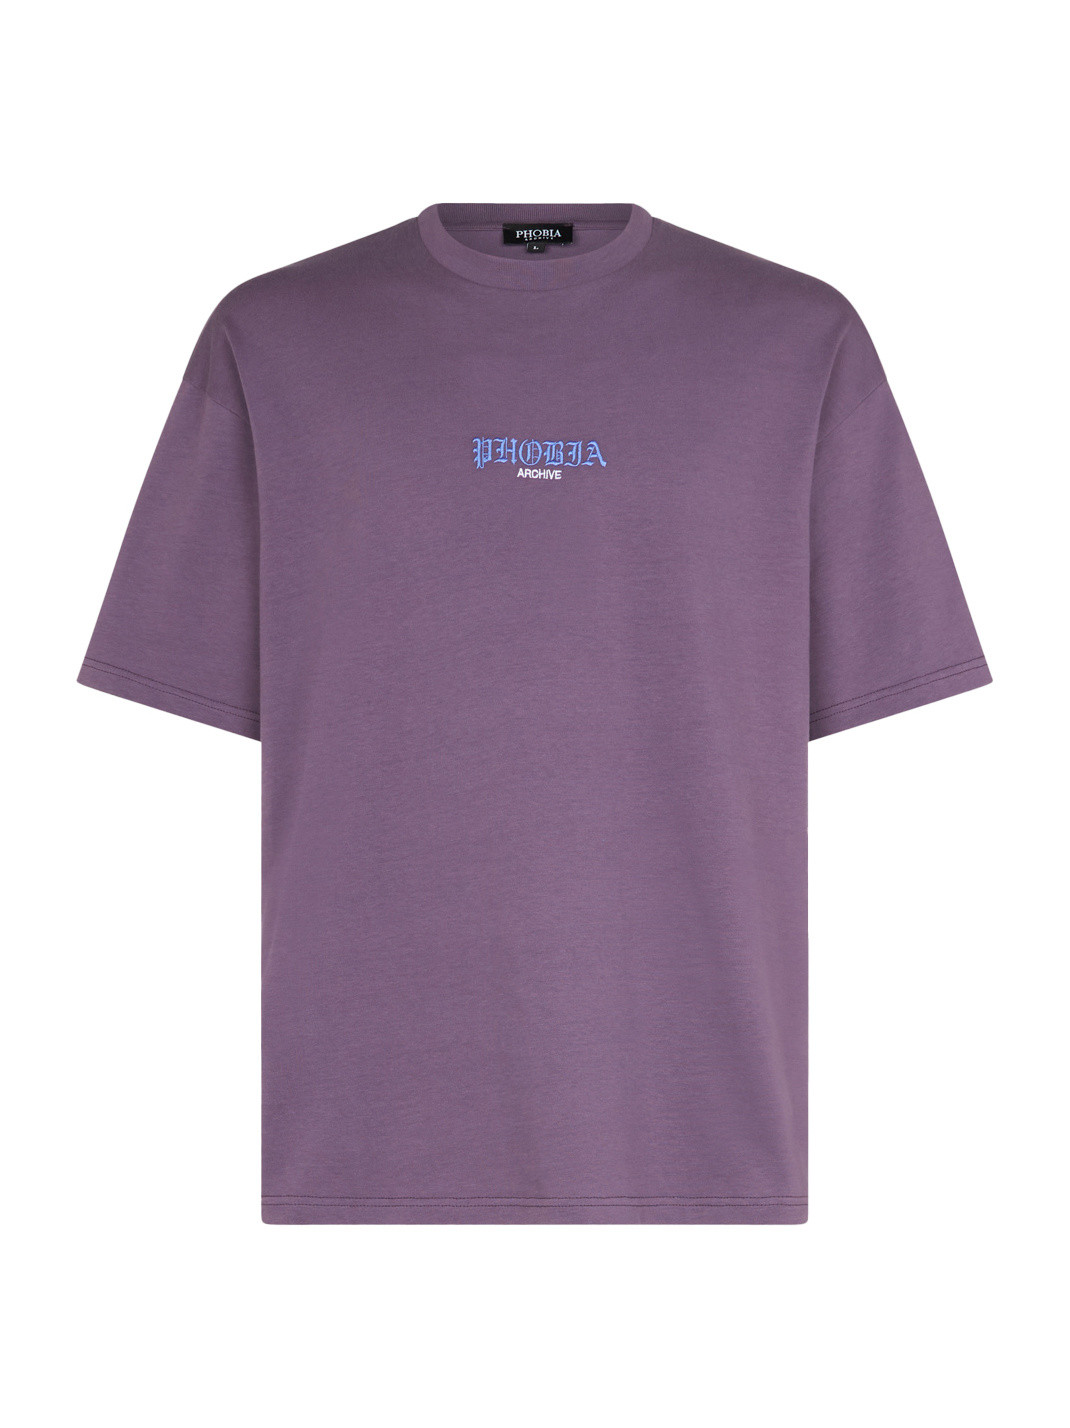 Phobia - Cotton T-shirt with print, Purple, large image number 0